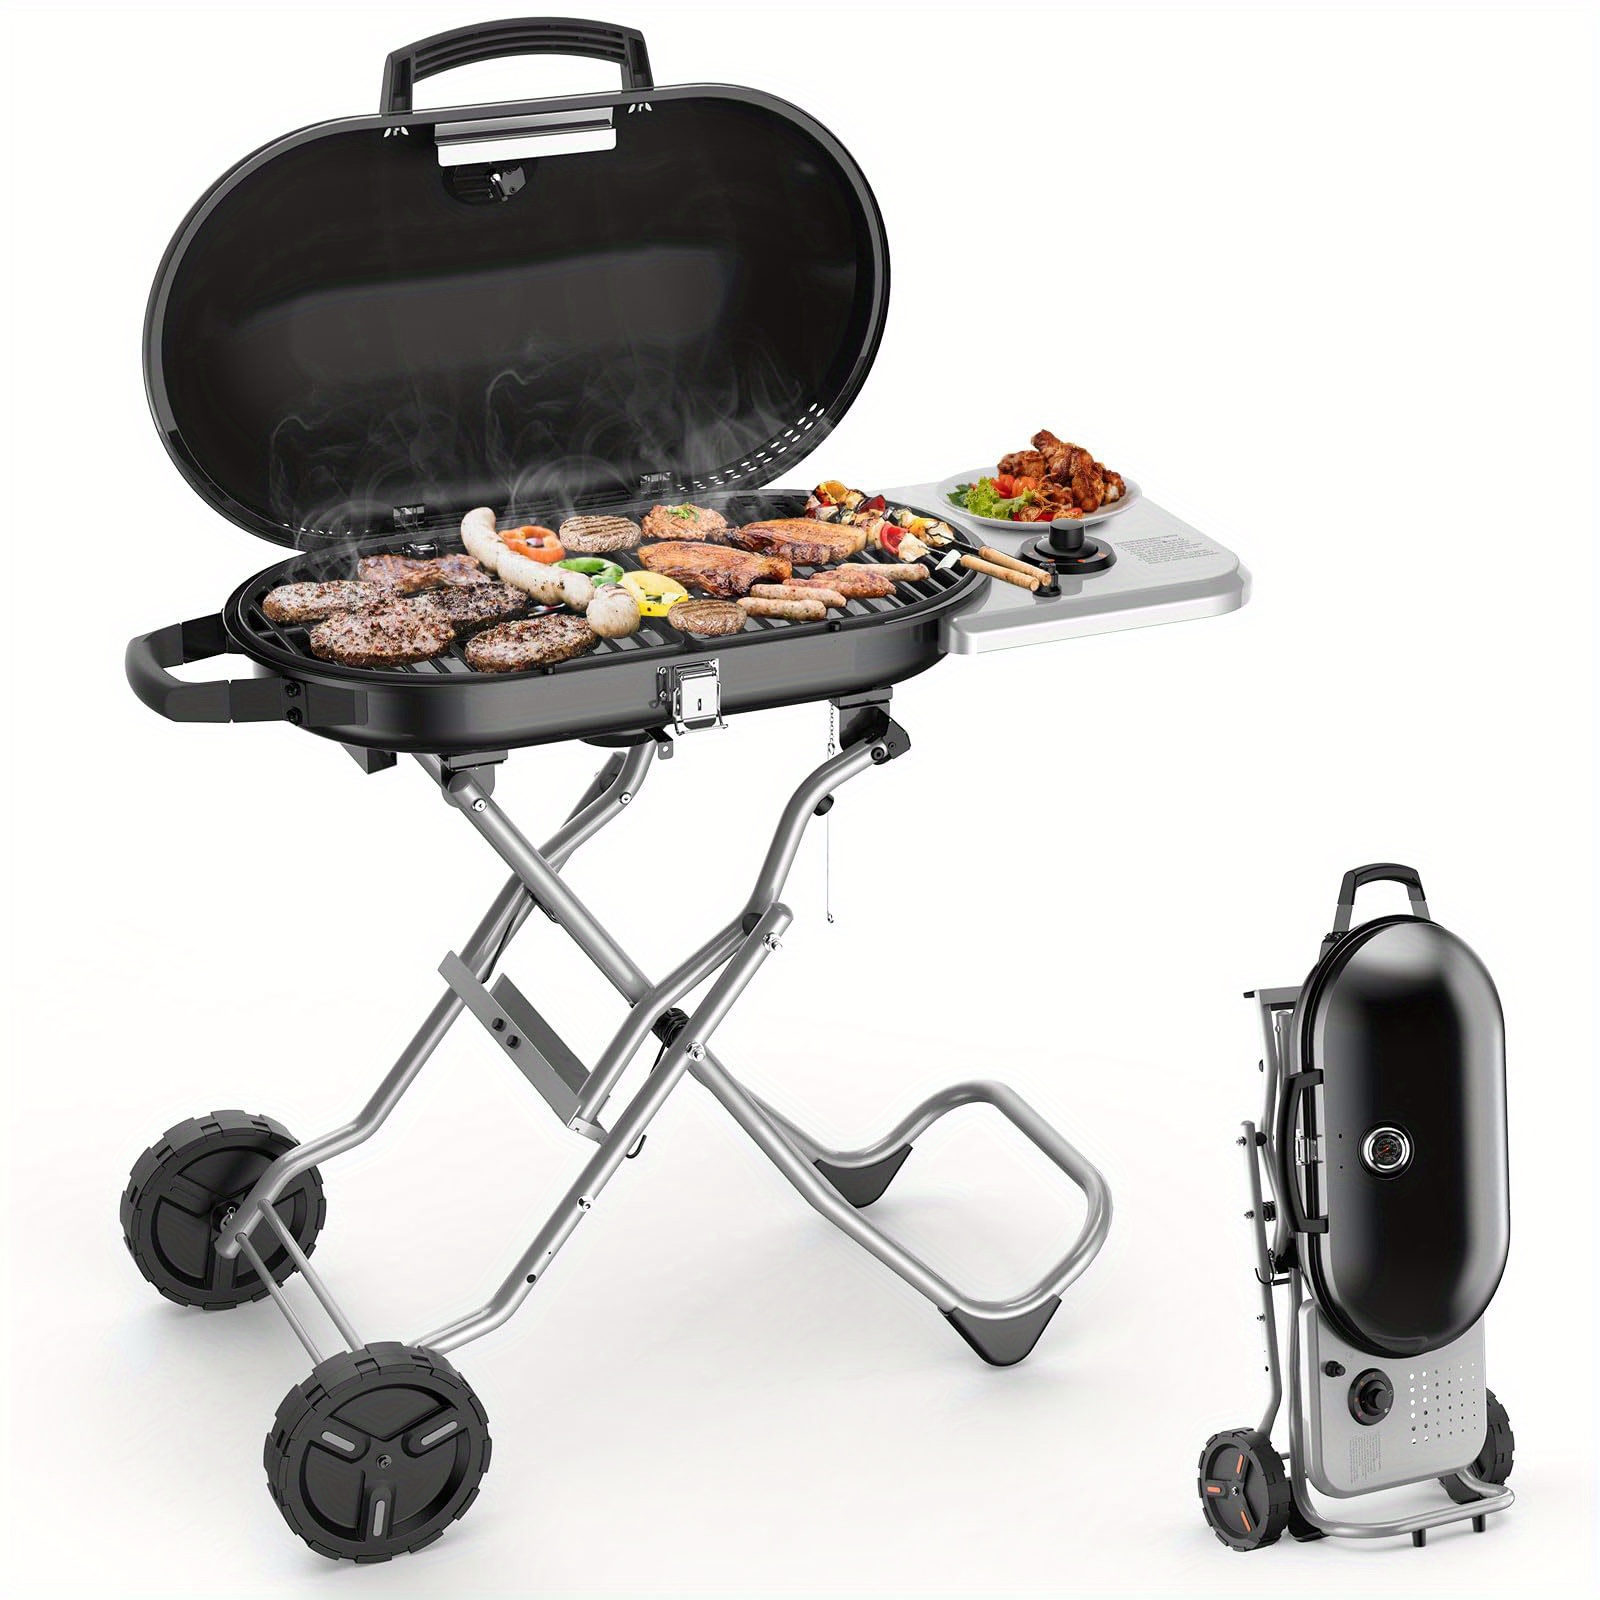 

Portable Propane Gas Grill, 15, 000btus, Bbq Gas Grill With 348 Sq Inch Large Cooking Areas, Sturdy Quick-fold Legs, Portable & Foldable Gas Grill For Outdoor Camping/tailgating/picnic